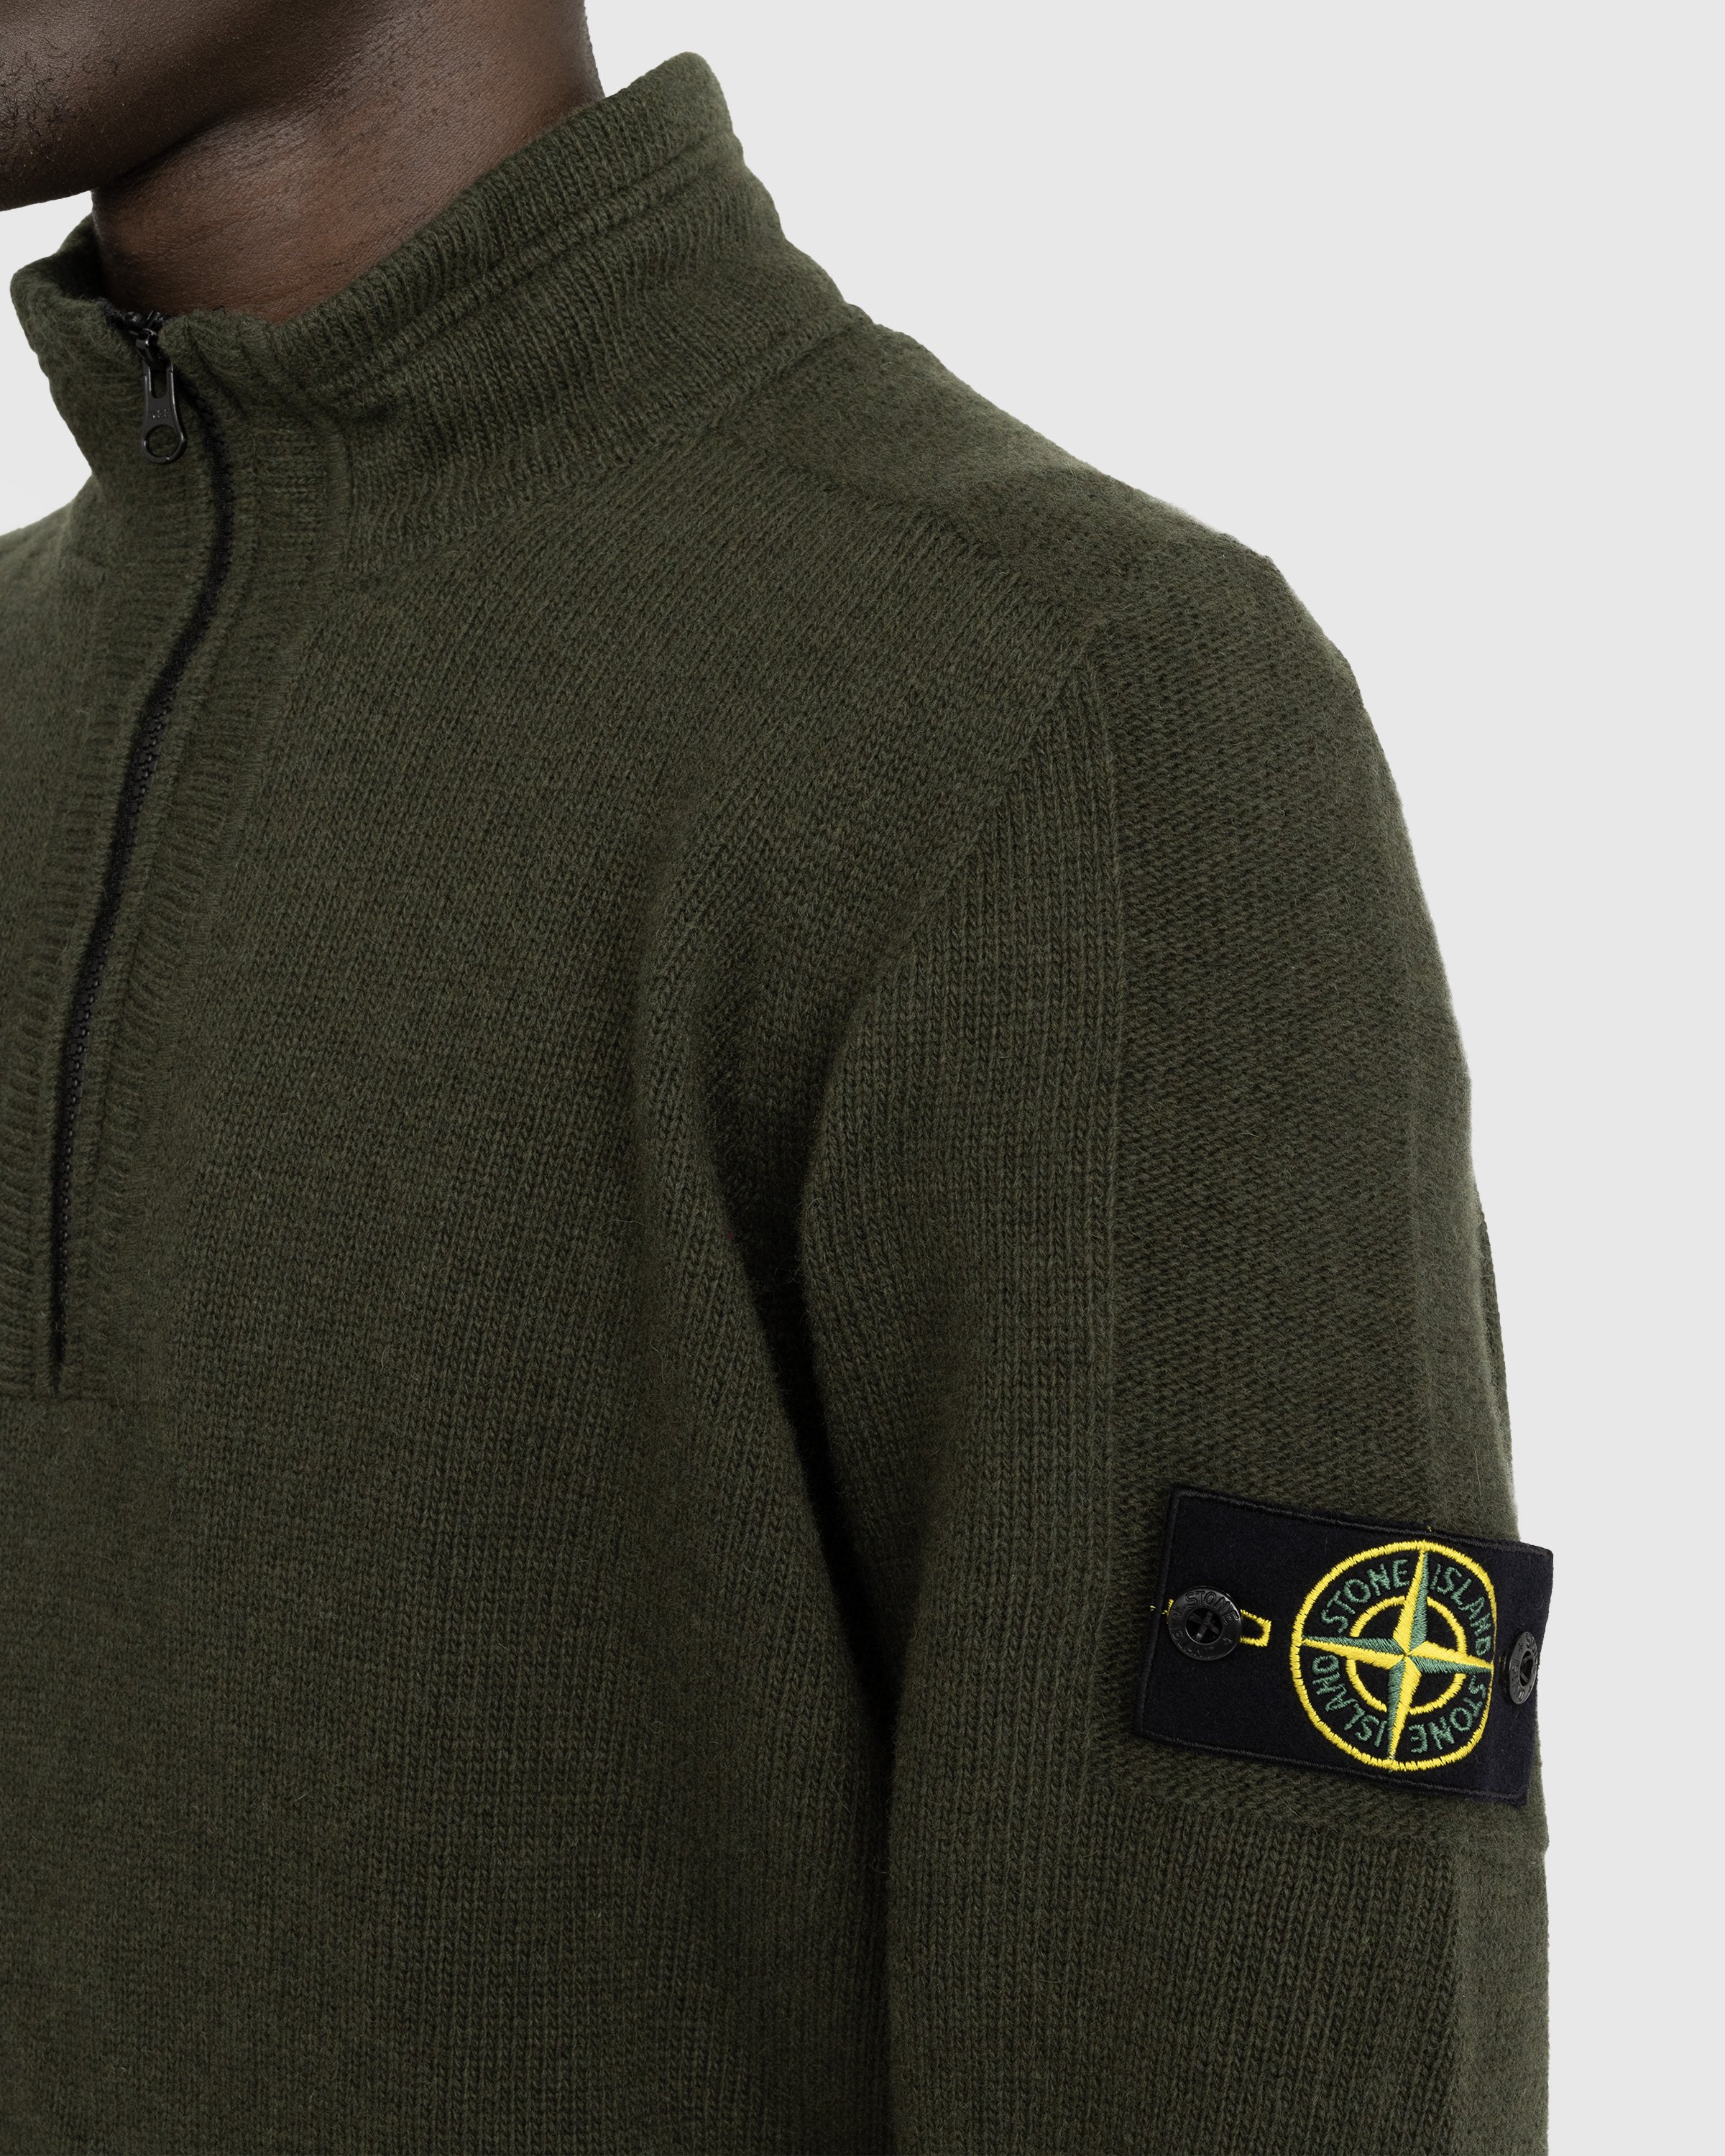 Stone Island - Lambswool Half-Zip Knit Olive - Clothing - Green - Image 4